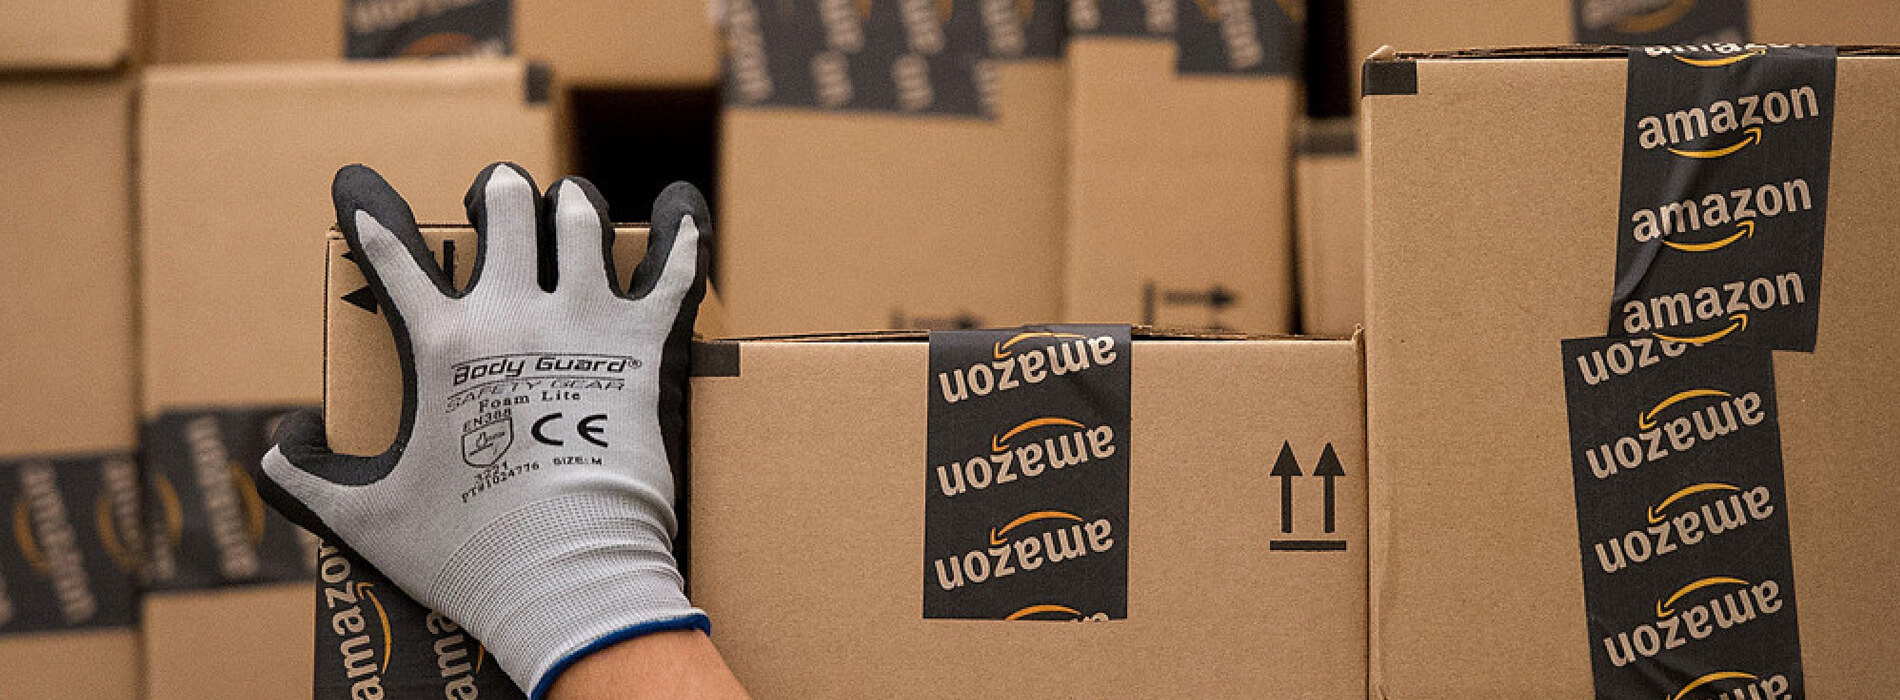 5 Ways to Compete with Amazon